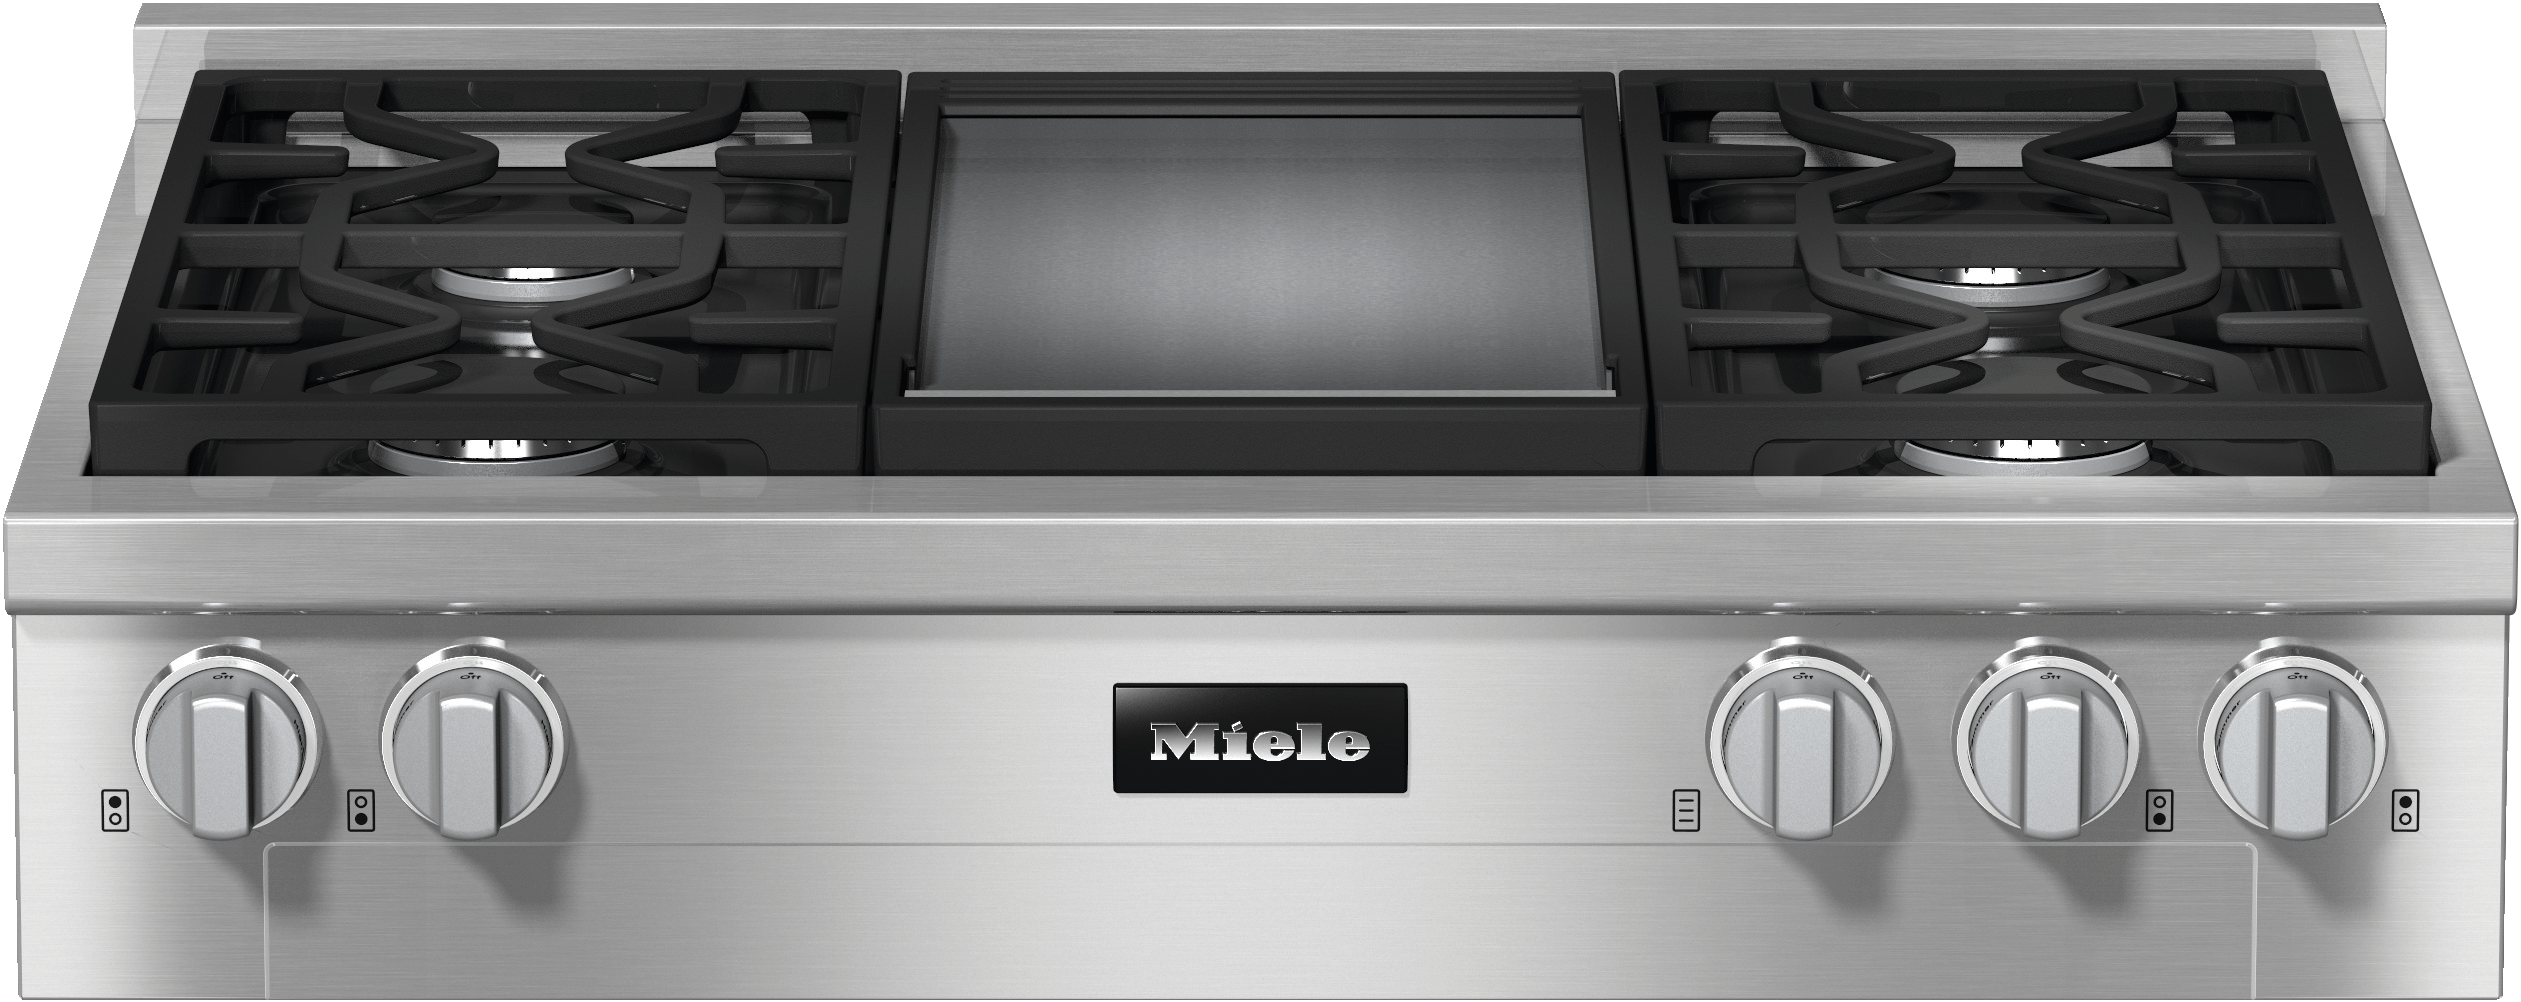 Miele KMR11363LPGDEDSTCLSTCLEANSTEEL Kmr 1136-3Lp Gd Edst/Clst - Rangetop With Burners And Griddle For Versatility And Performance